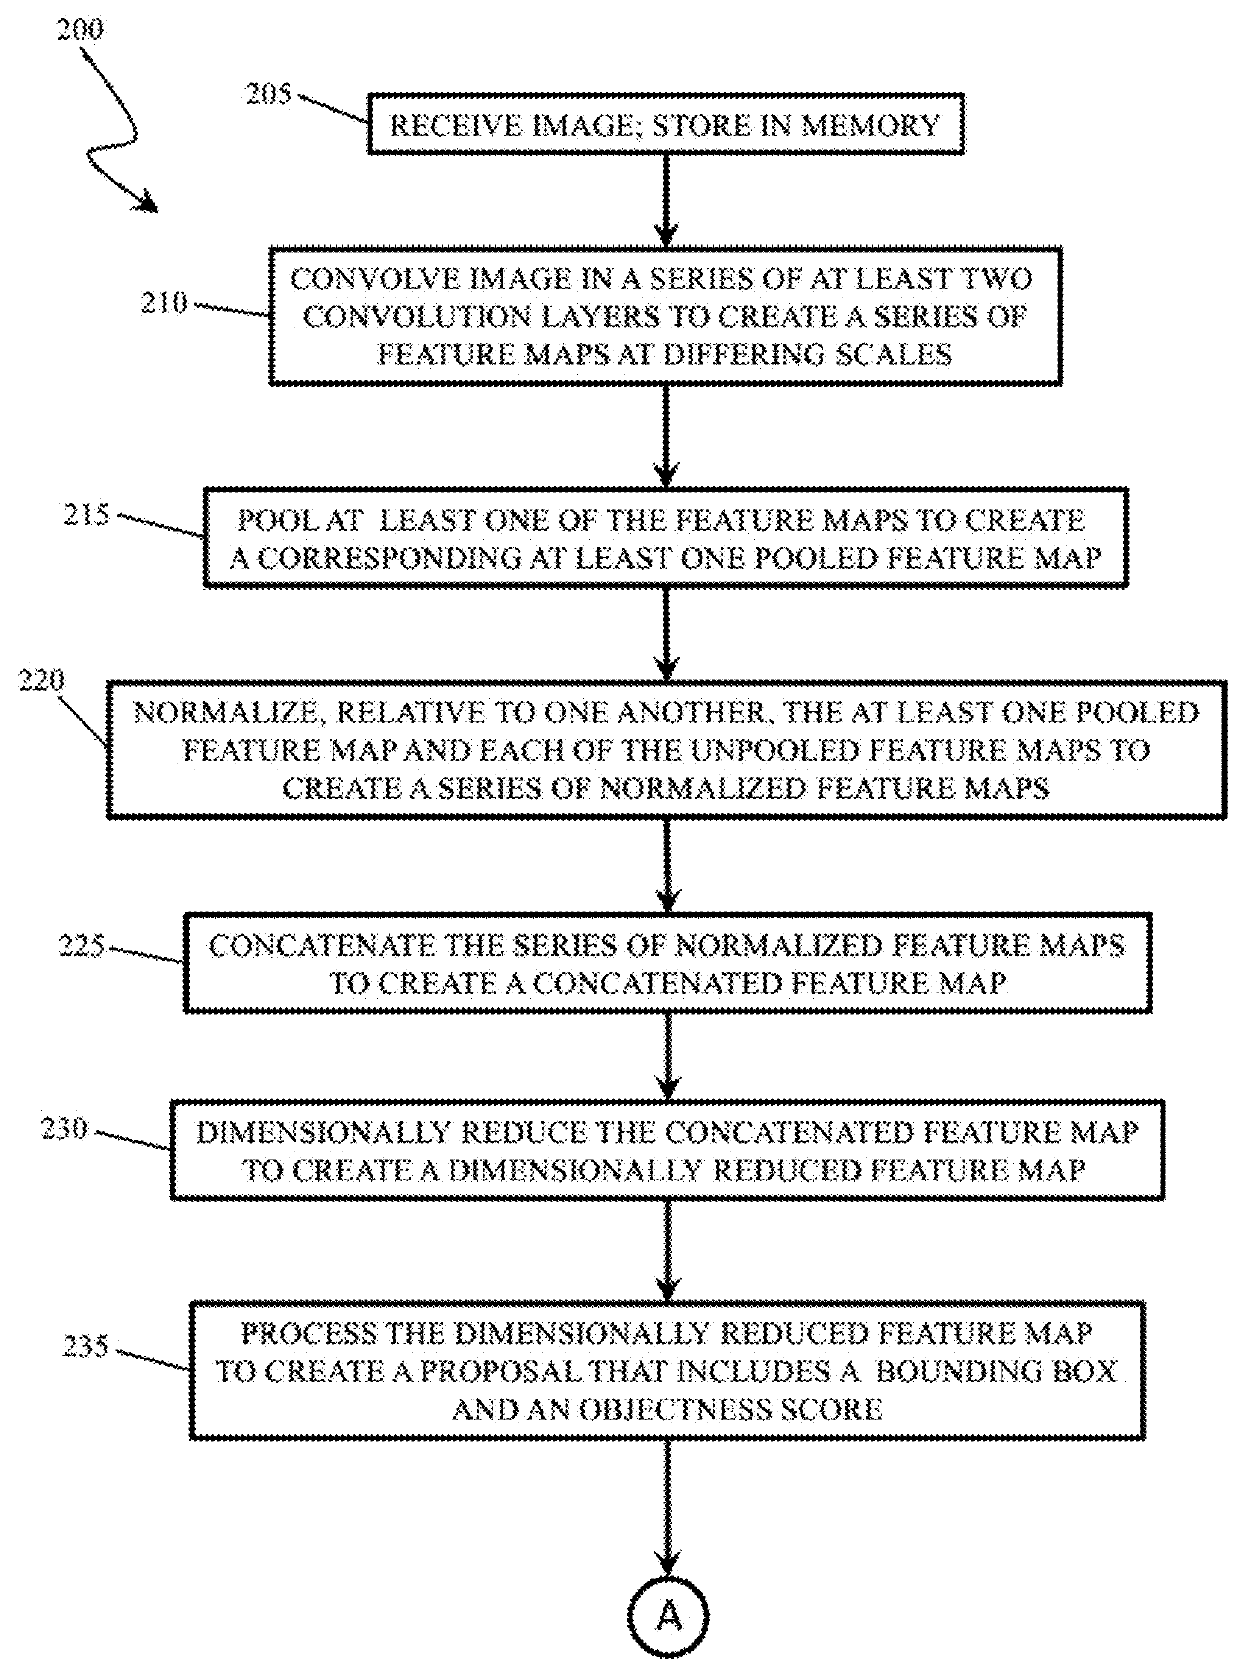 Methods and Software For Detecting Objects in Images Using a Multiscale Fast Region-Based Convolutional Neural Network